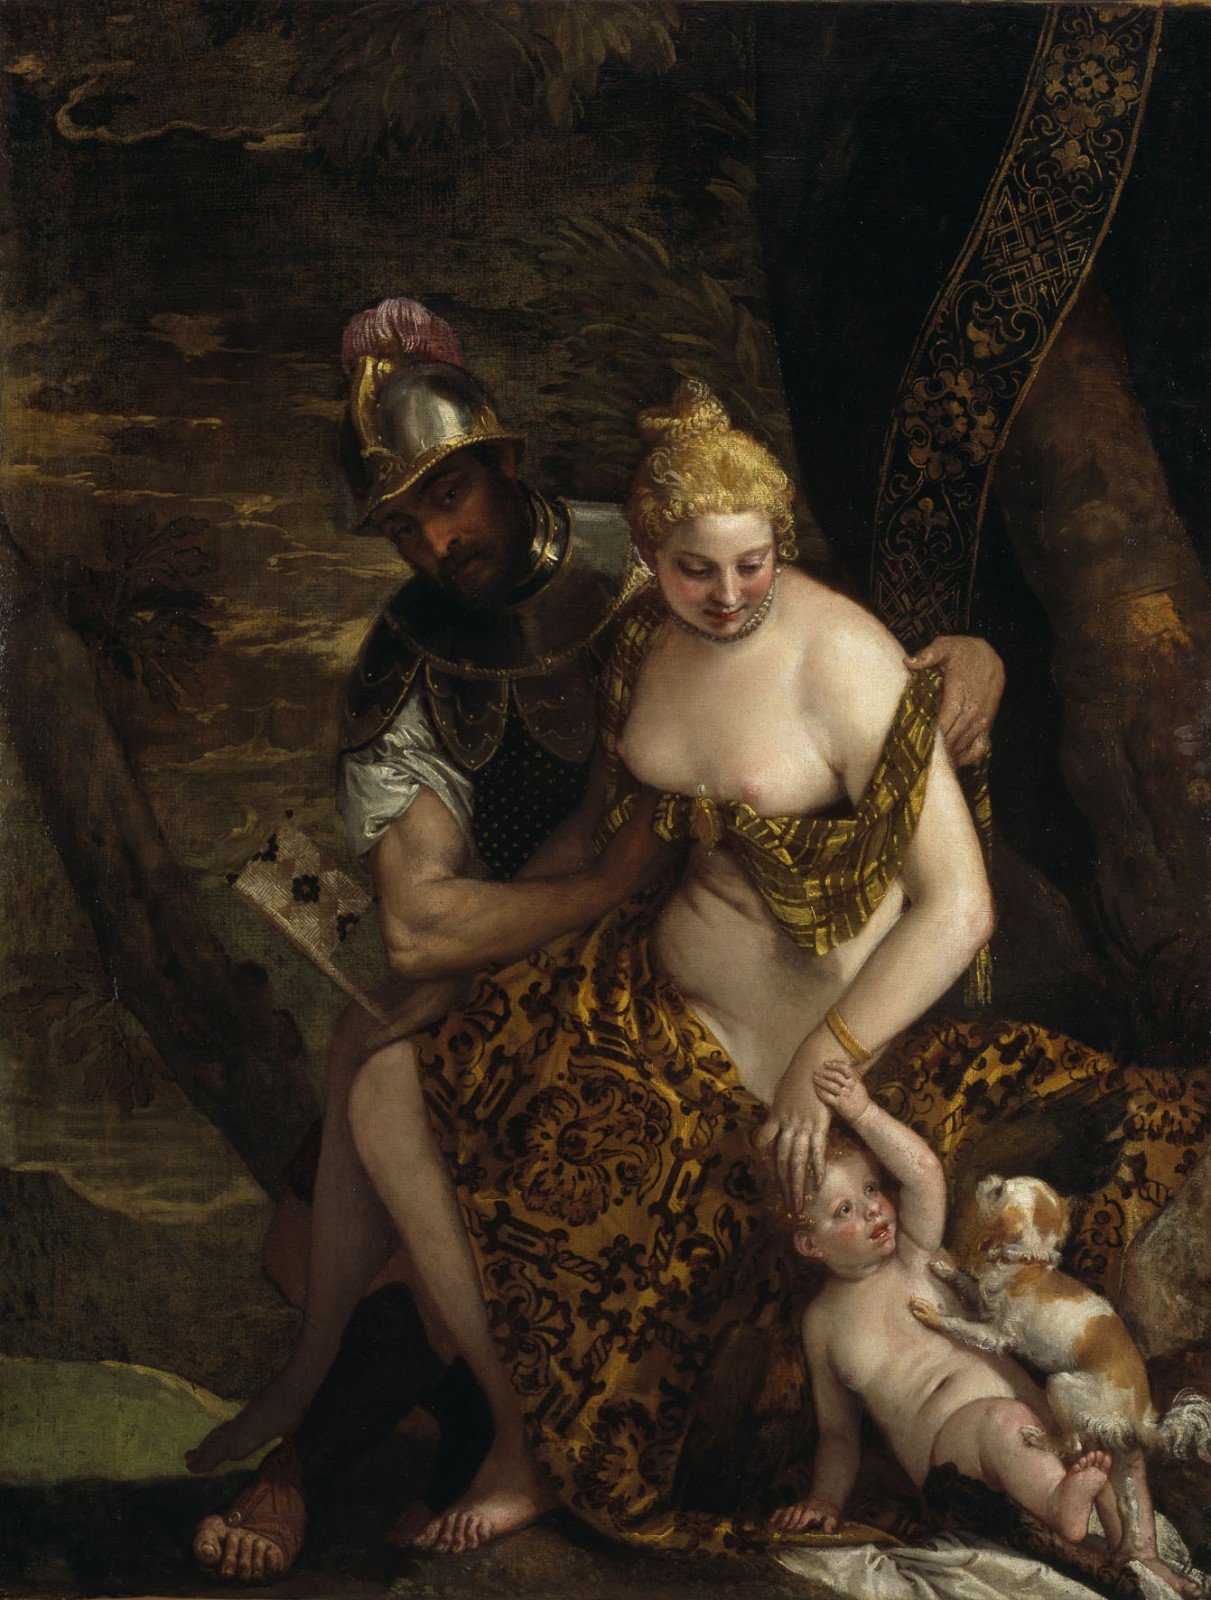 Paolo Veronese (1528-1588), “Venus, Mars and Cupid”, about 1580. Oil on canvas, 163 × 125 cm © National Galleries of Scotland